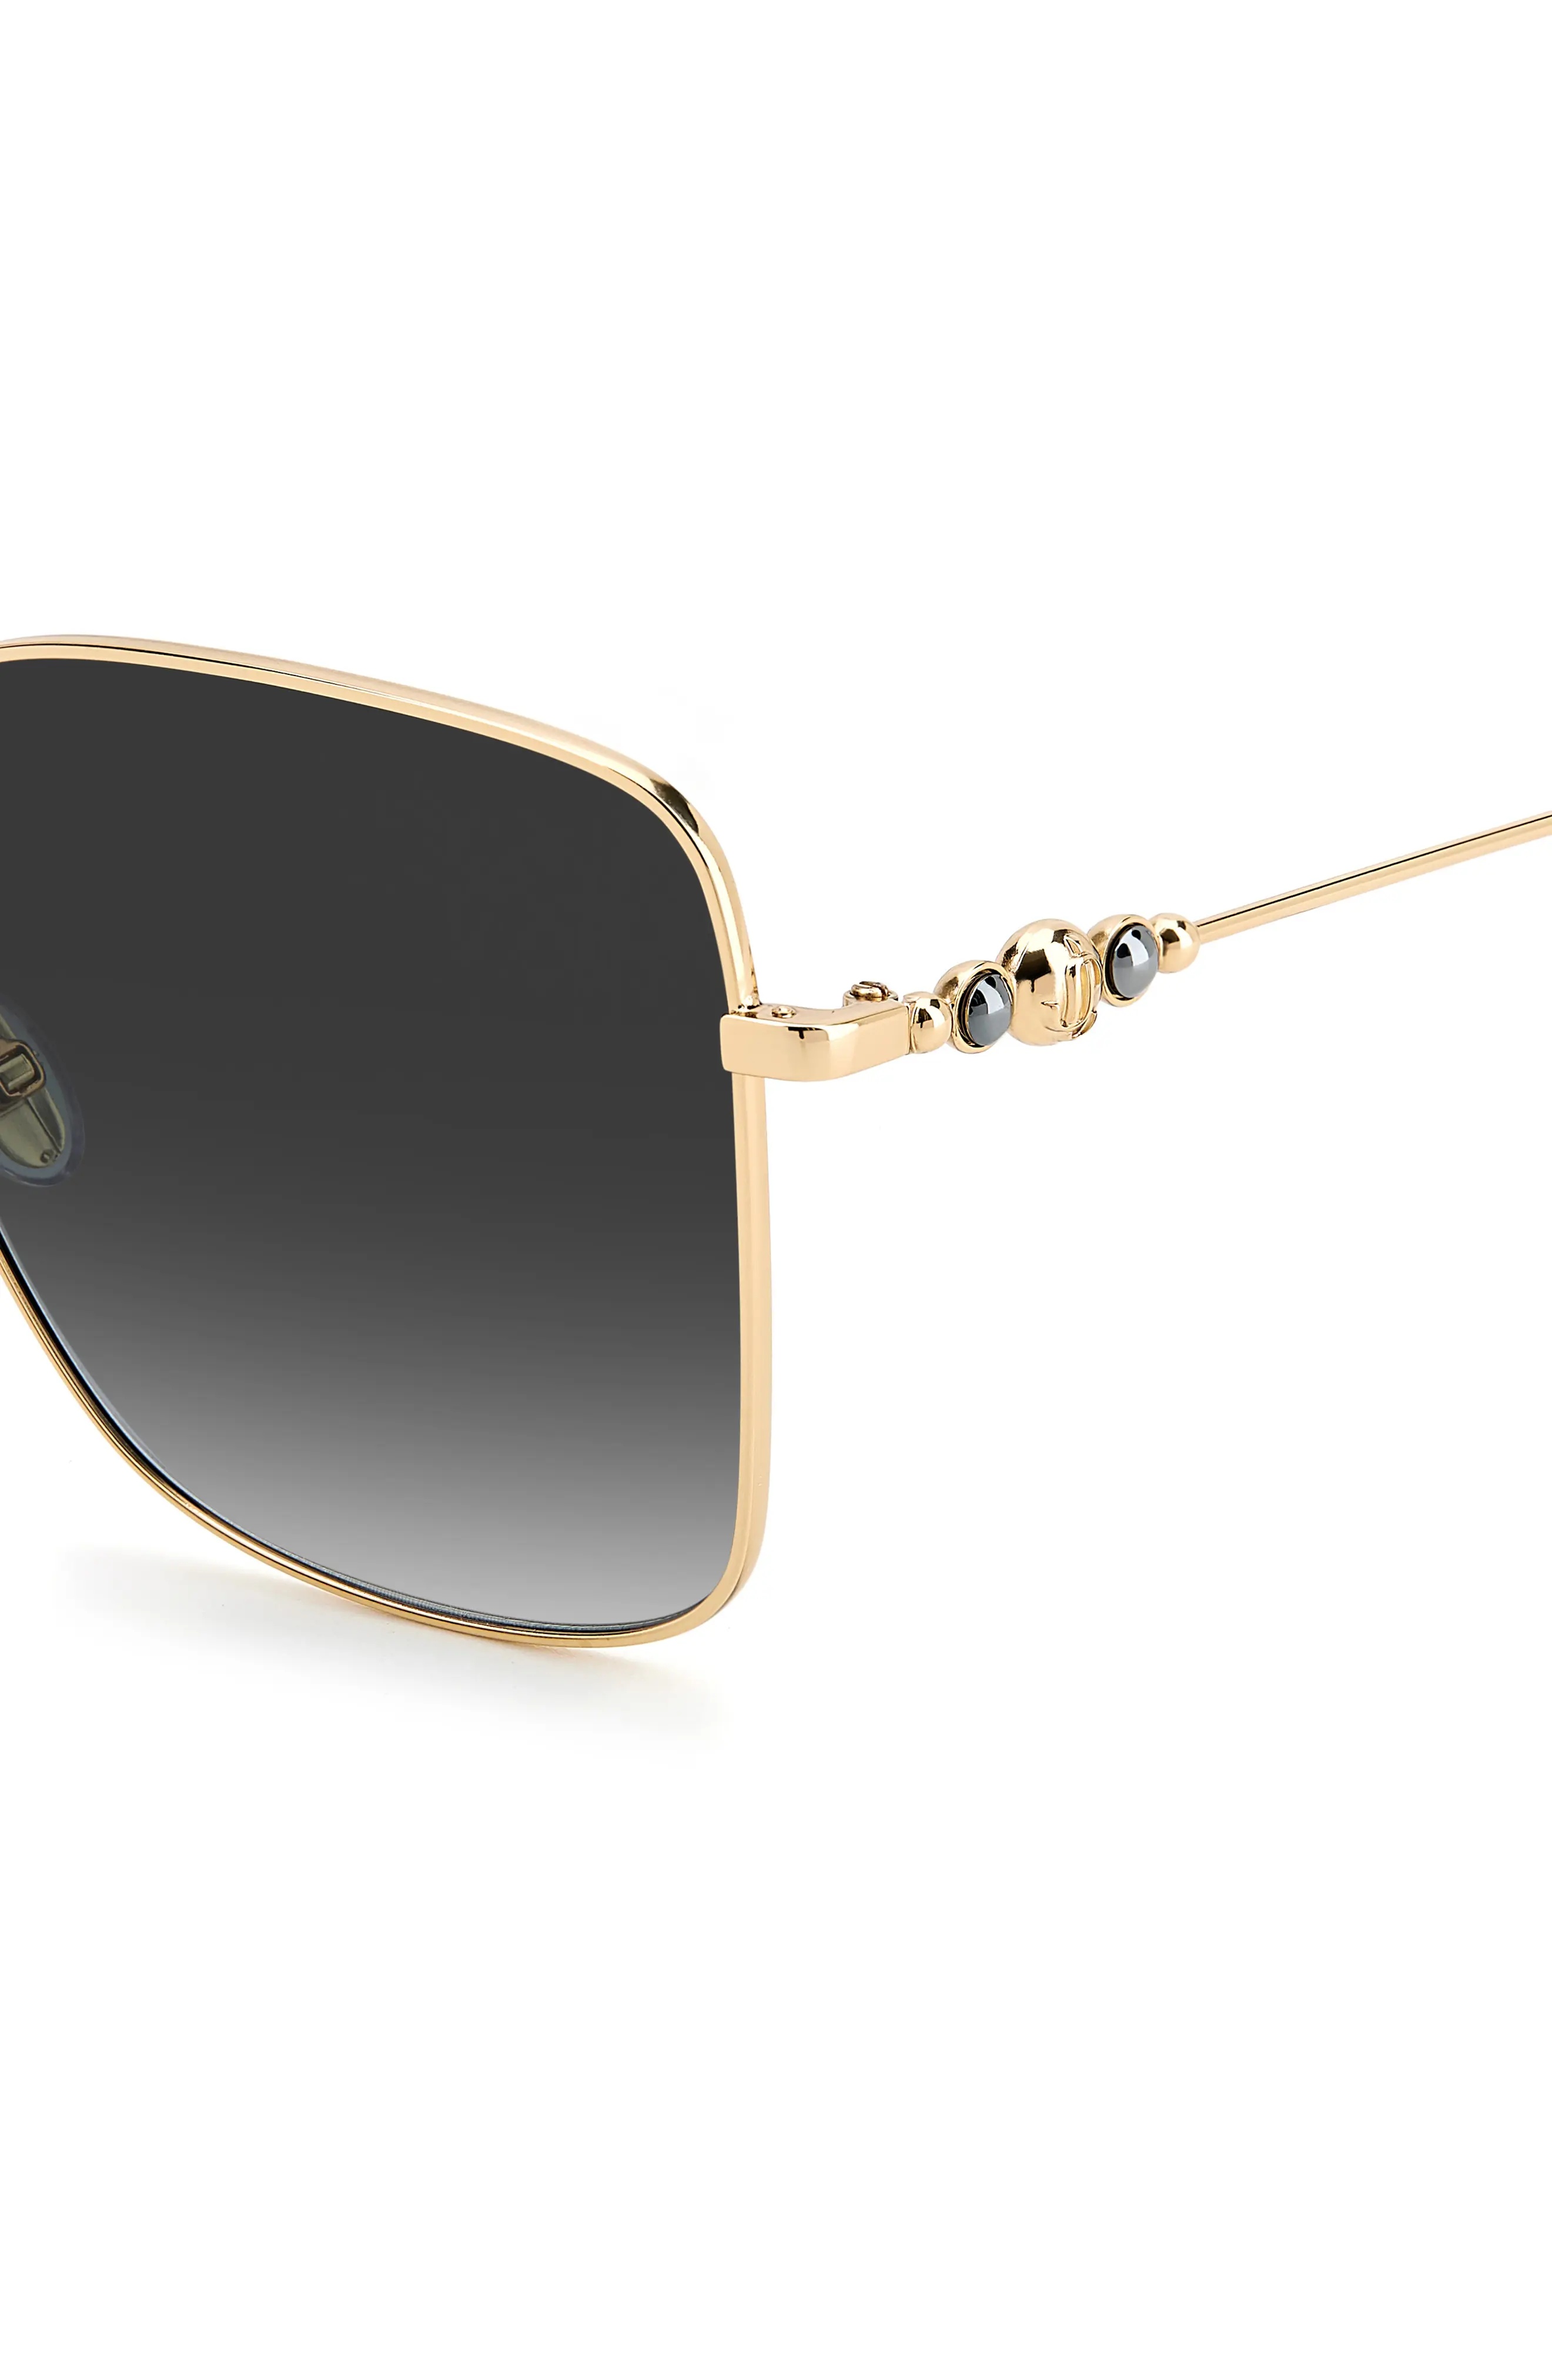 Hesters 59mm Gradient Square Sunglasses in Black Gold /Grey Shaded - 3